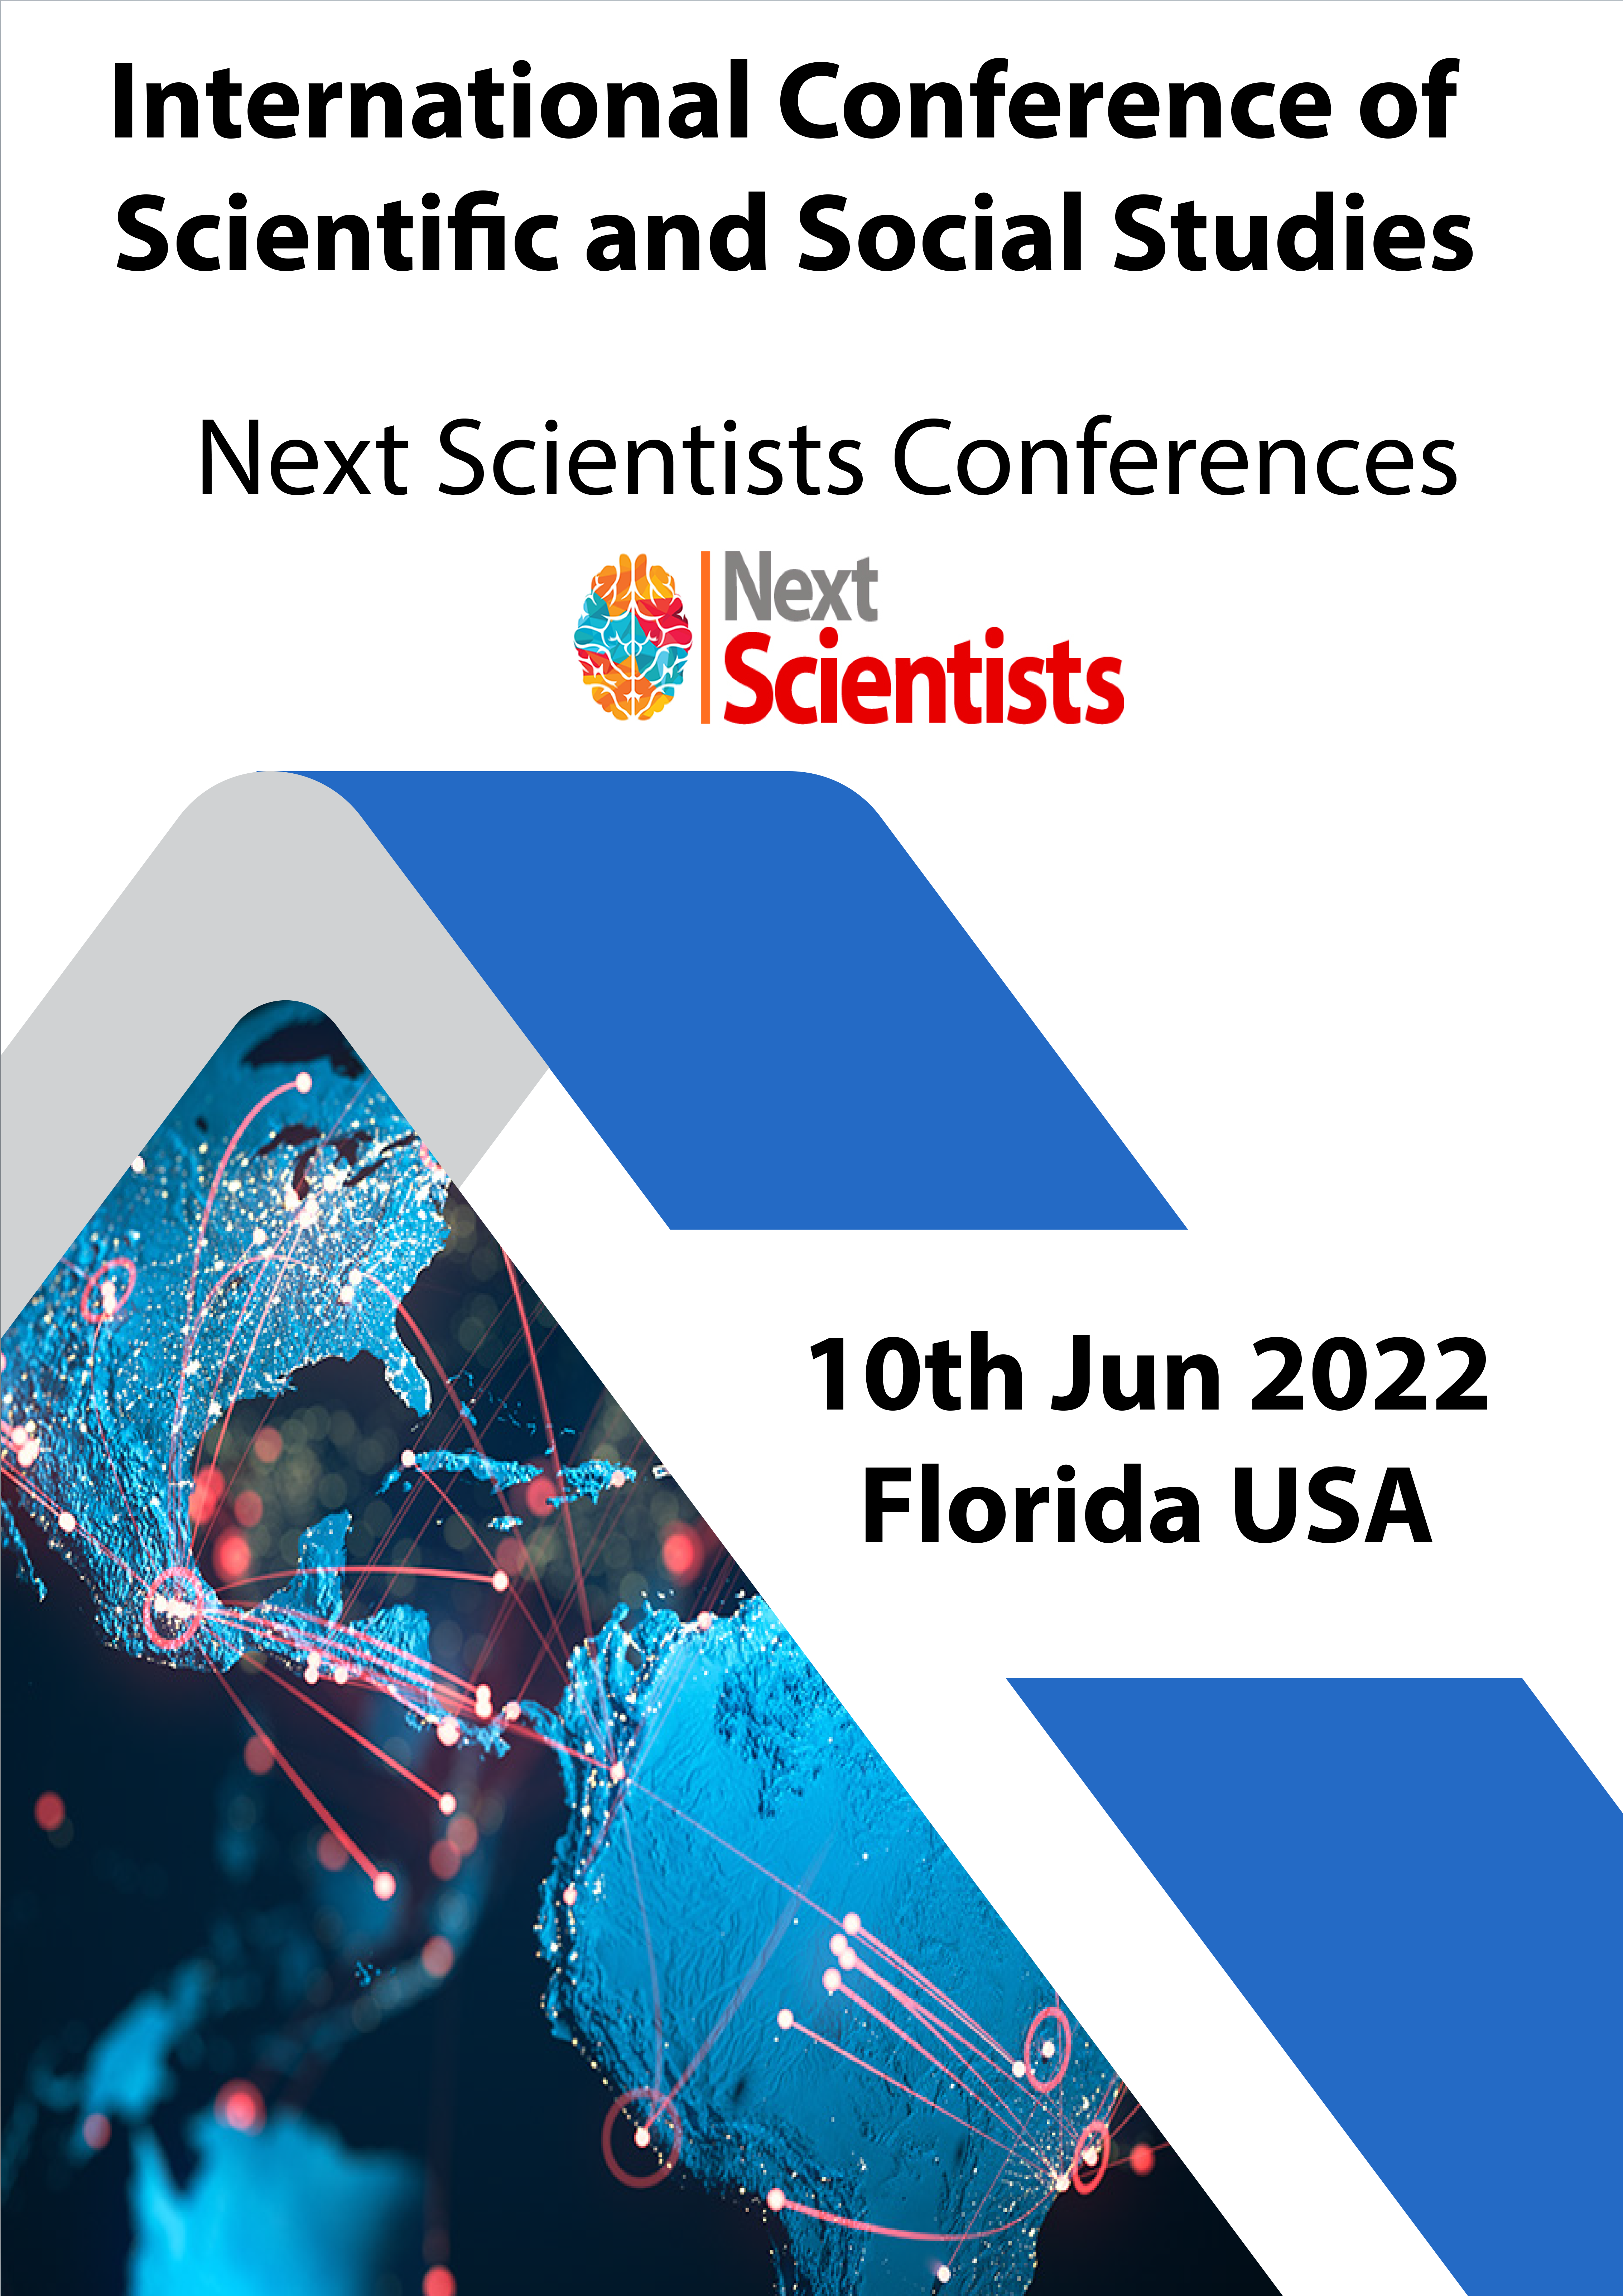 					View 2022: International Conference of Scientific and Social Studies
				